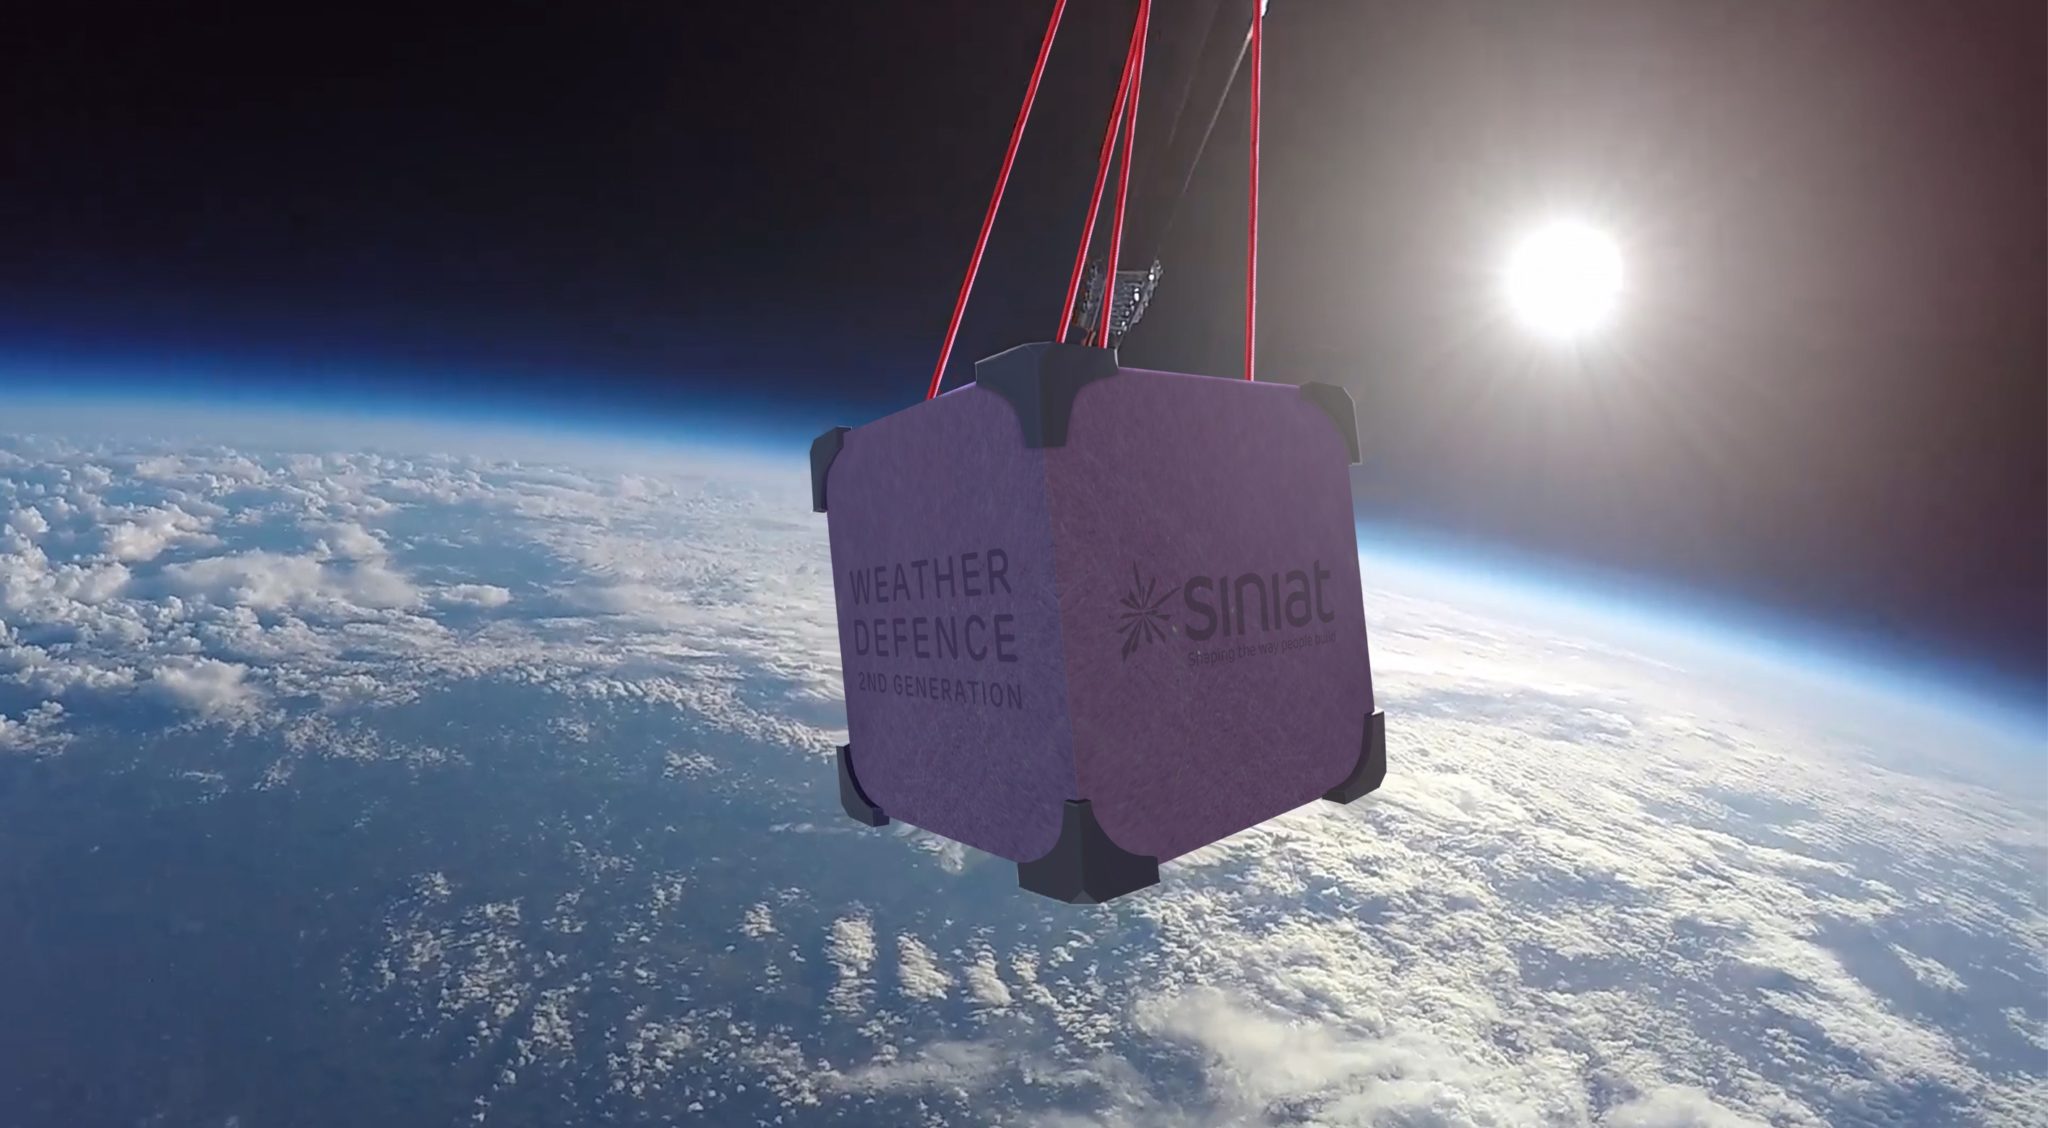 Siniat’s Weather Defence is out of this world